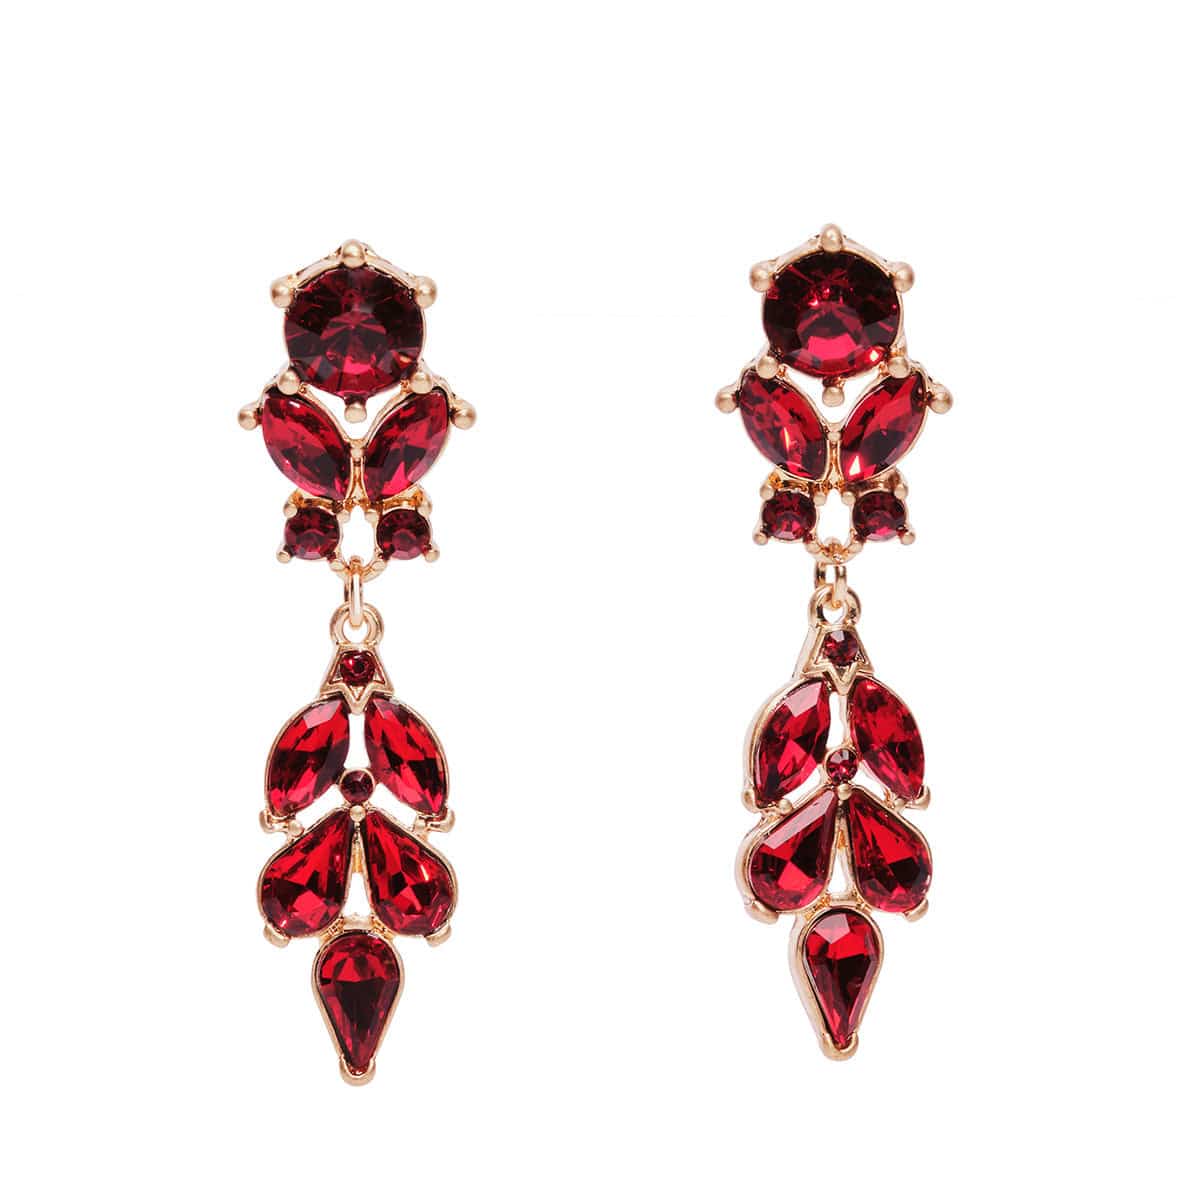 Vintage Metal Hand Carved Pomegranate Earrings Set with Red Stone Hook Drop  Earrings for Women